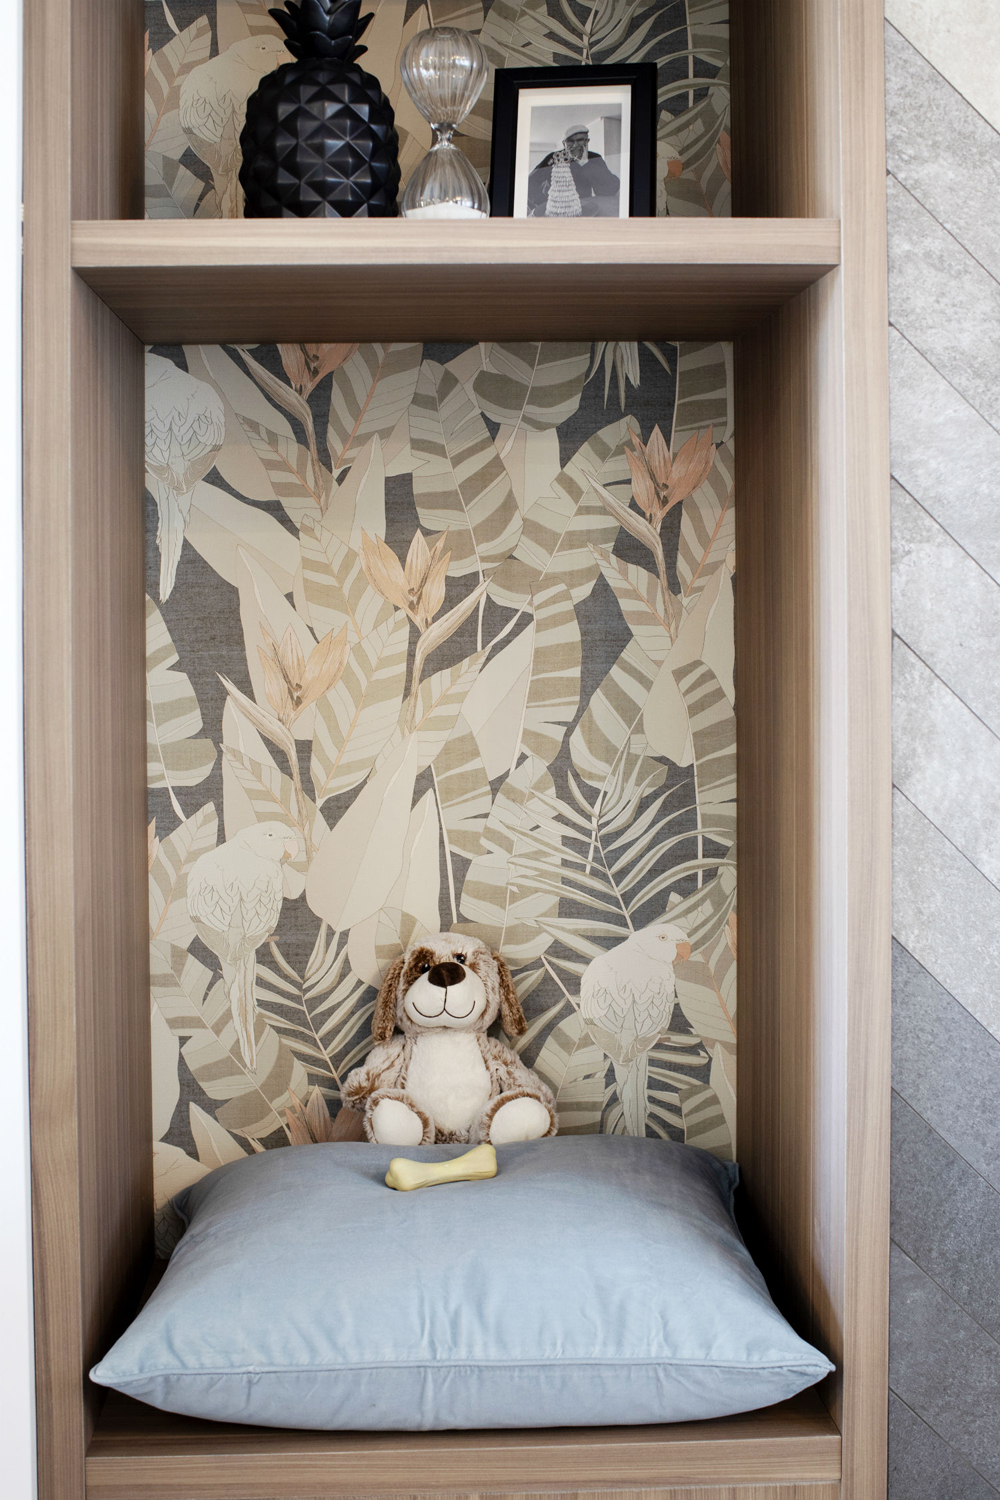 A custom-made media unit with patterned wallpaper within each shelf